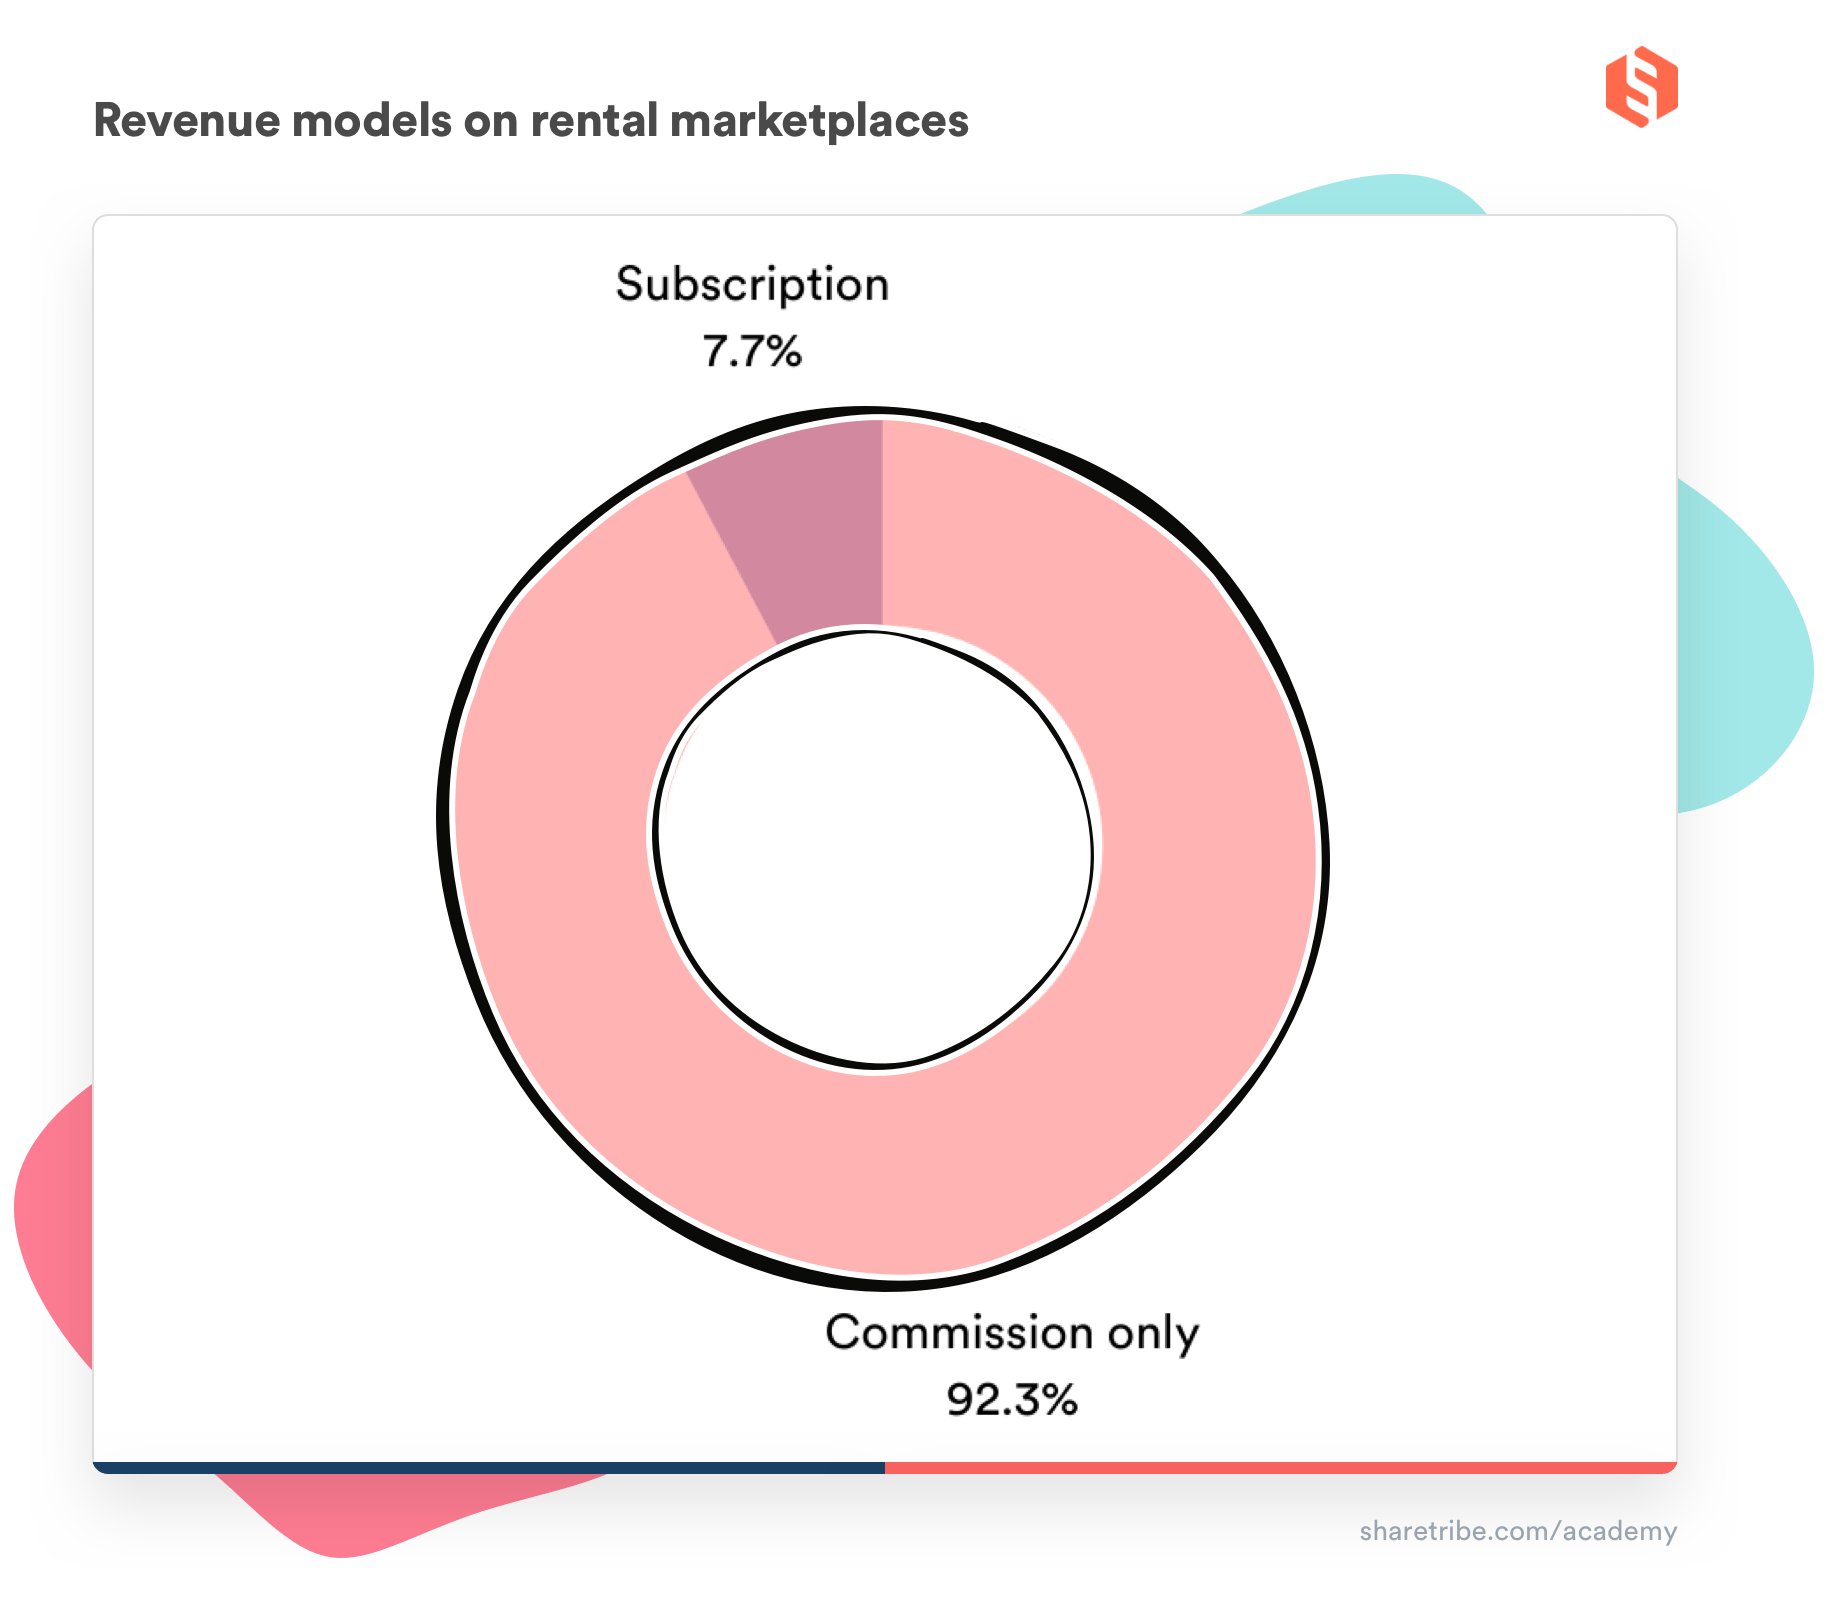 A donut chart of the percentages of revenue models used on rental marketplaces